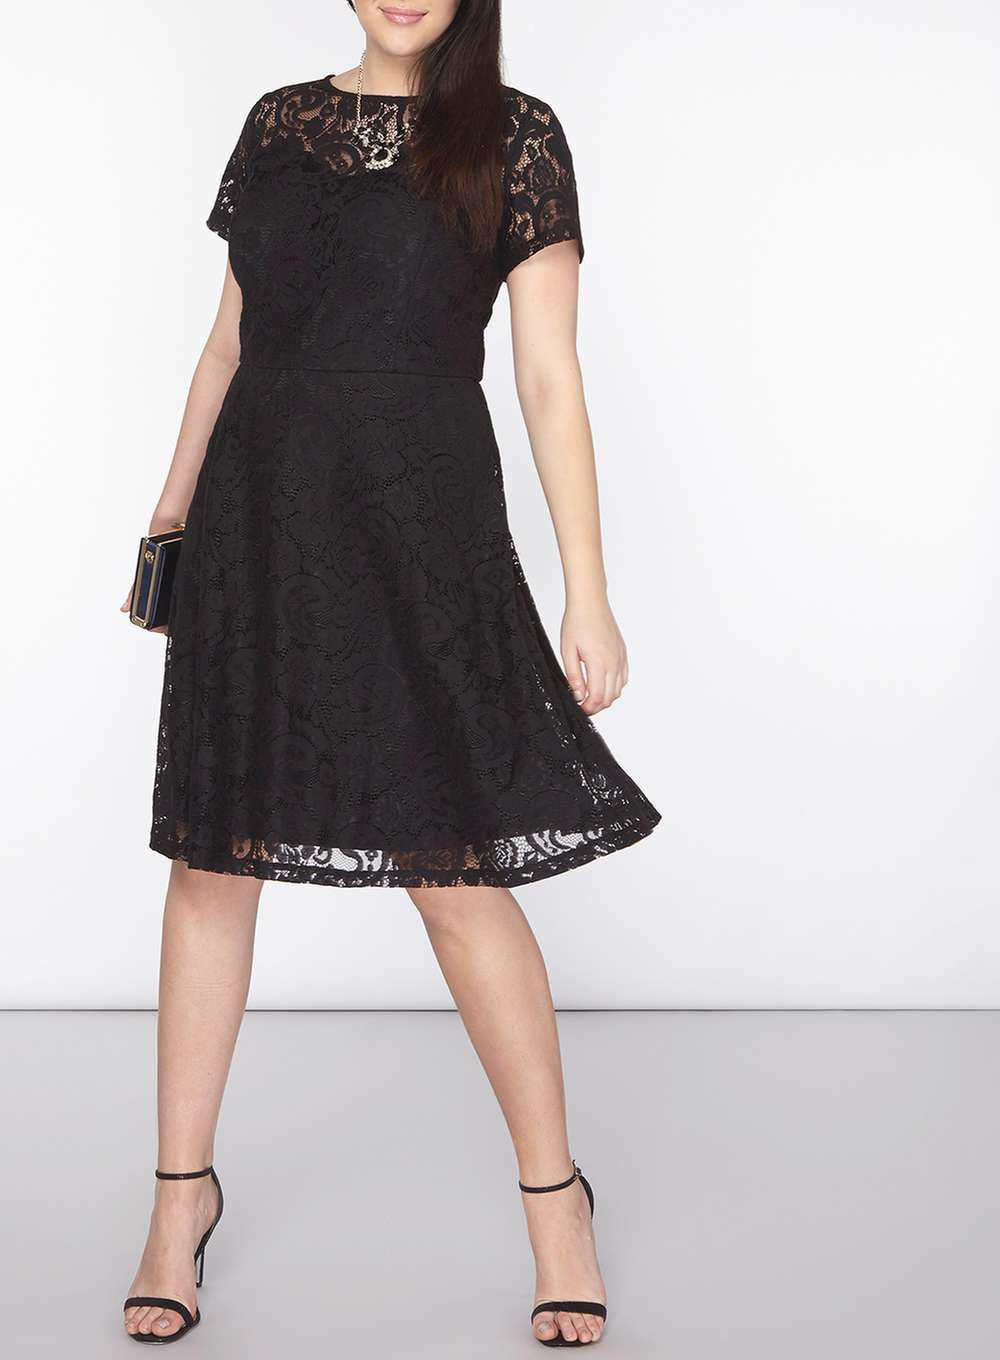 Dorothy Perkins Black Lace Dress Greece, SAVE 48% - pacificlanding.ca